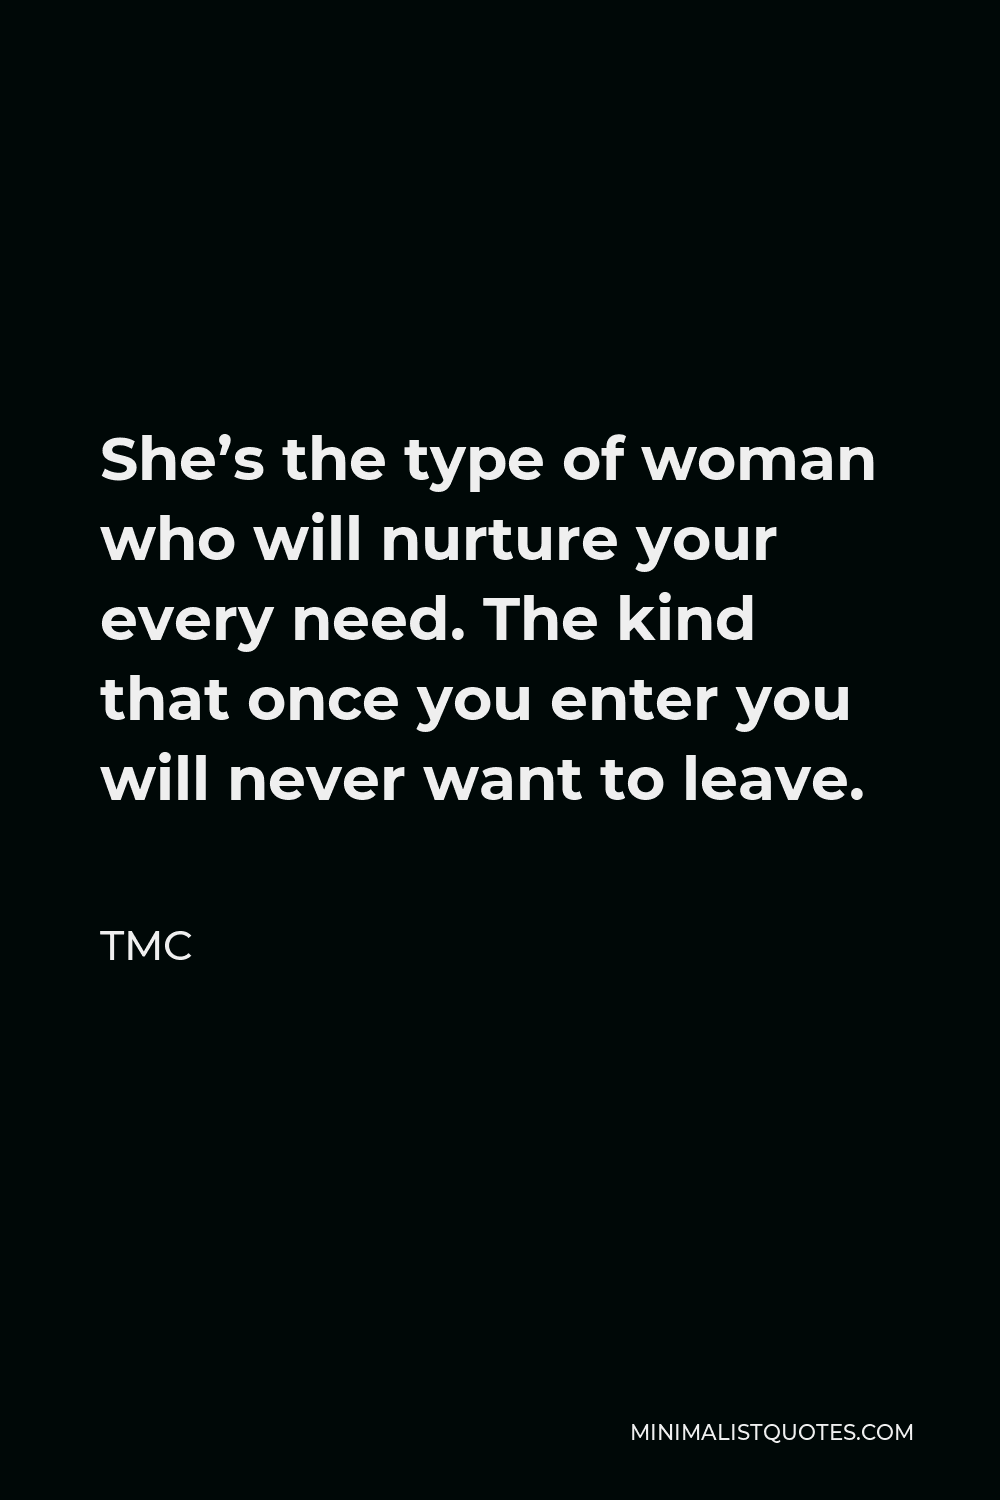 TMC Quote - She’s the type of woman who will nurture your every need. The kind that once you enter you will never want to leave.